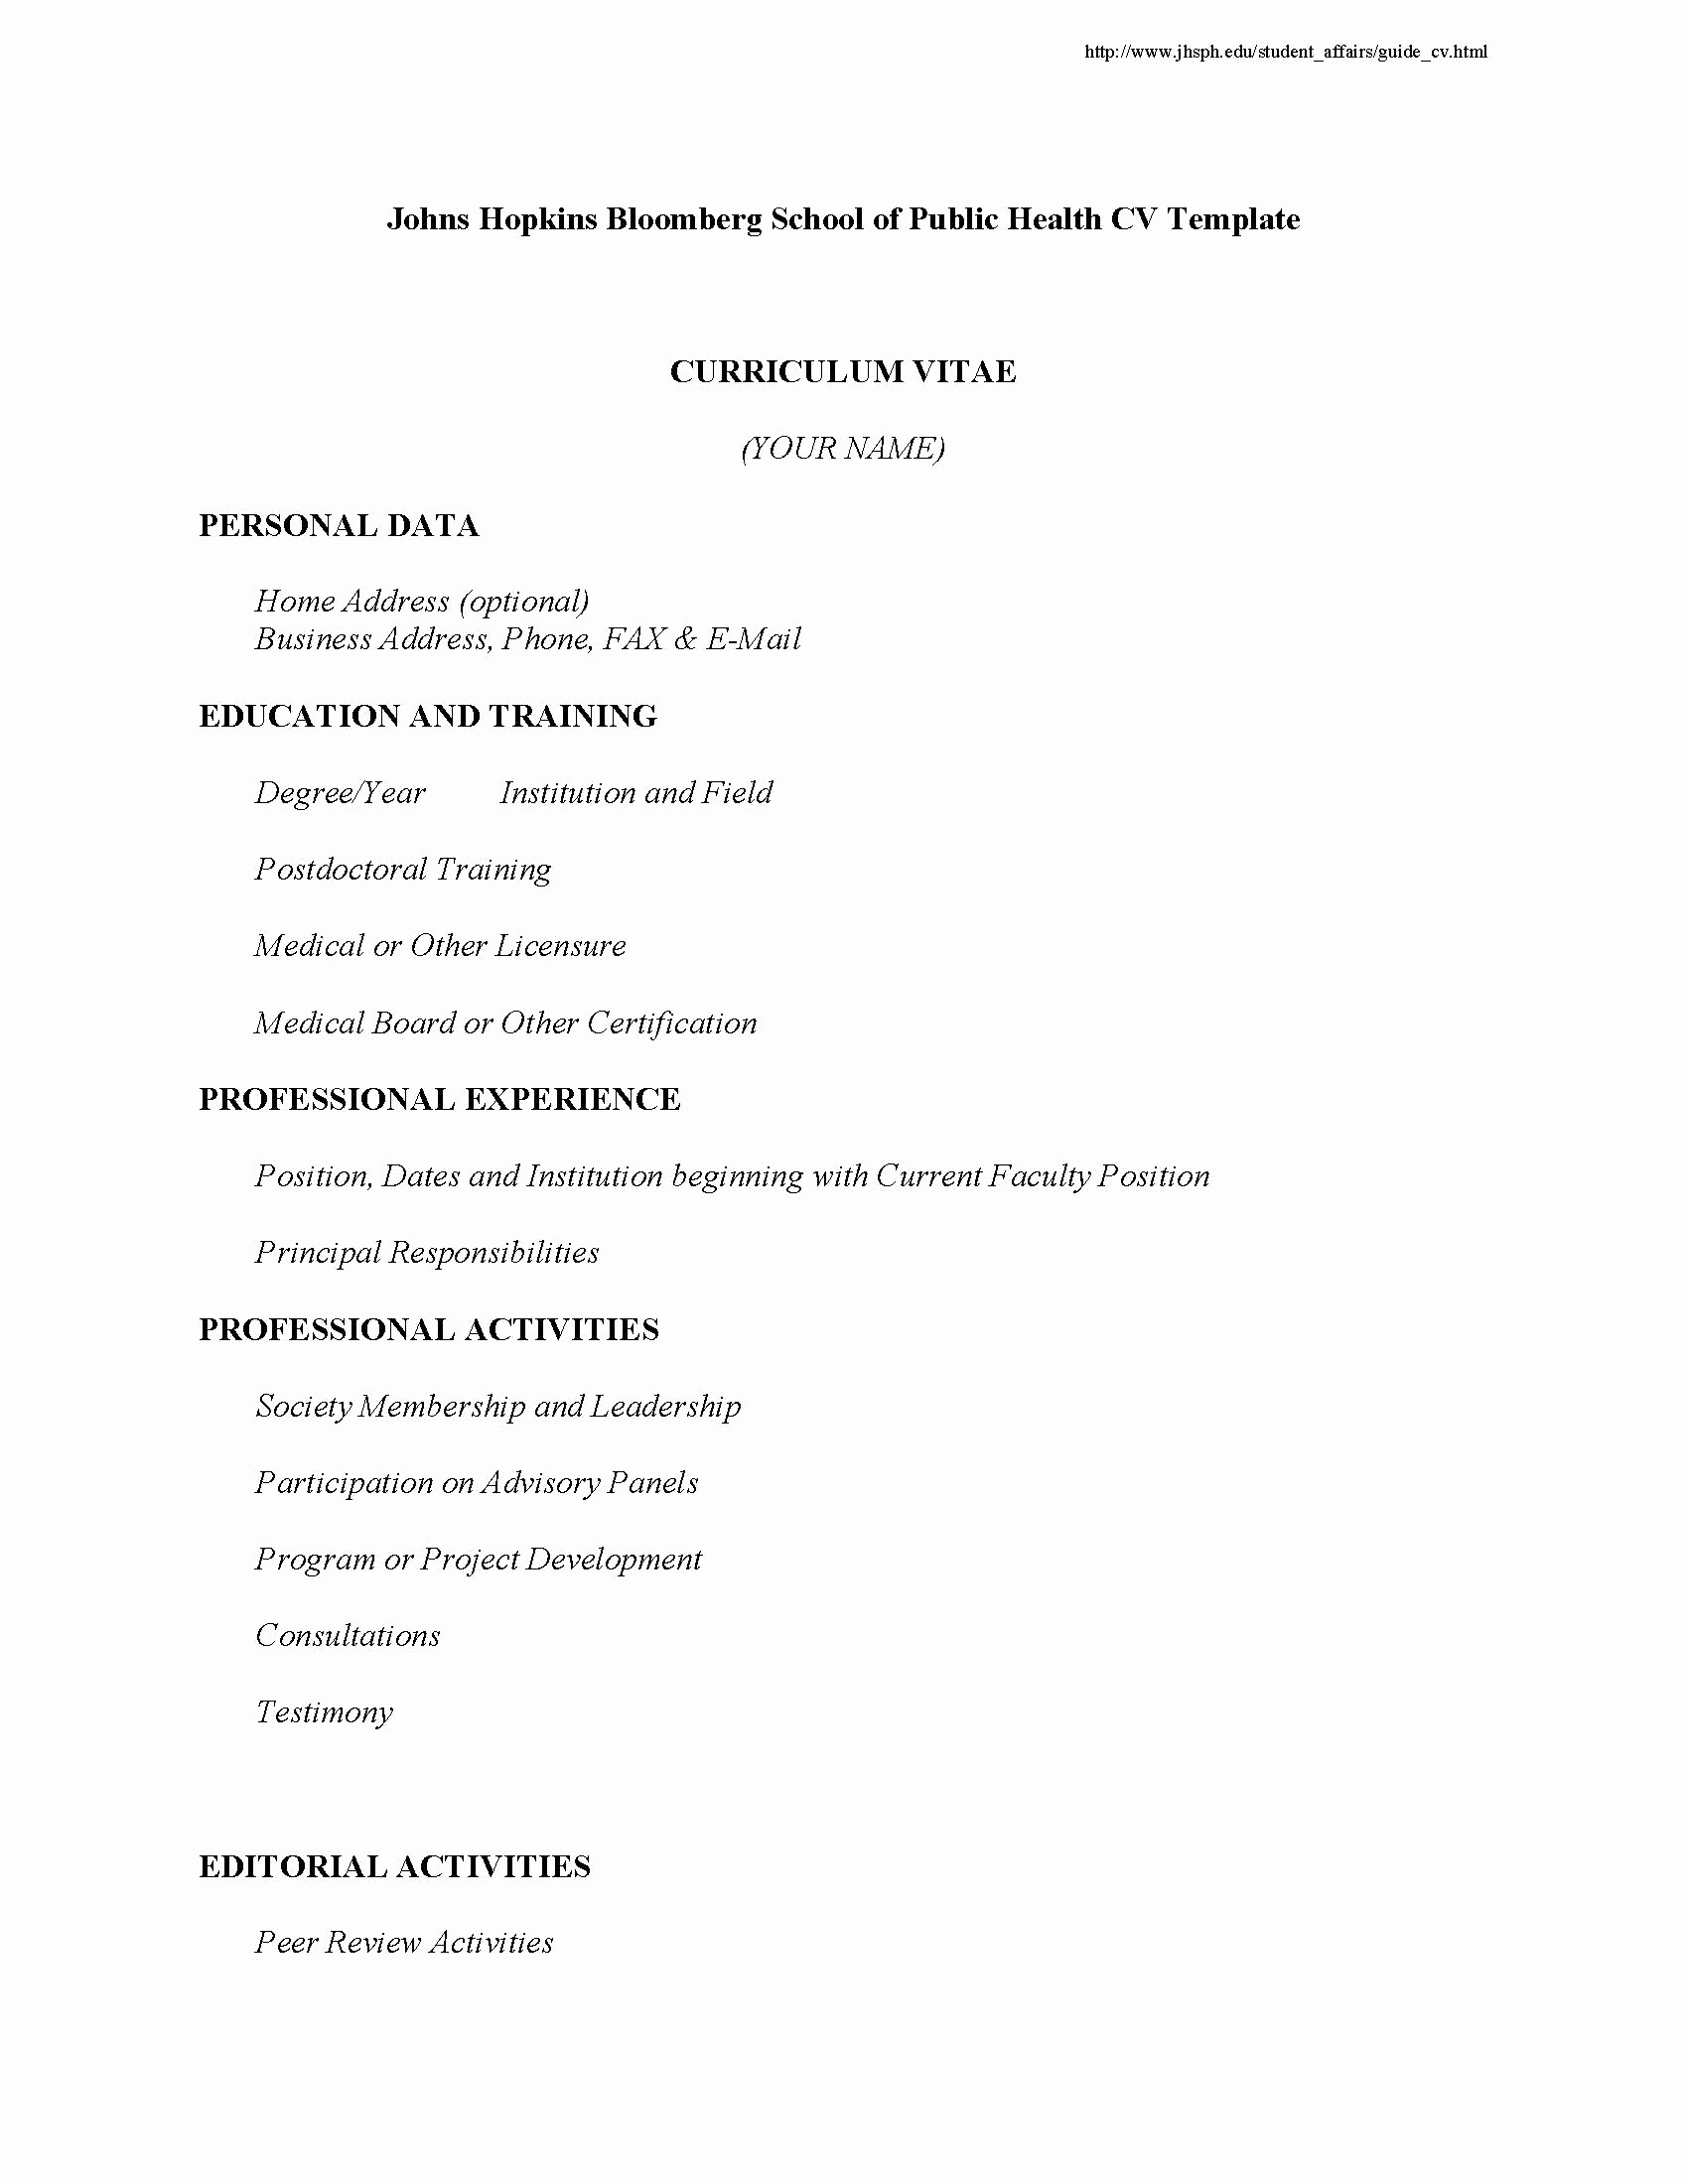 Sample Of Curriculum Vita Best Of Resumes and Cvs Career Resources for Students Career